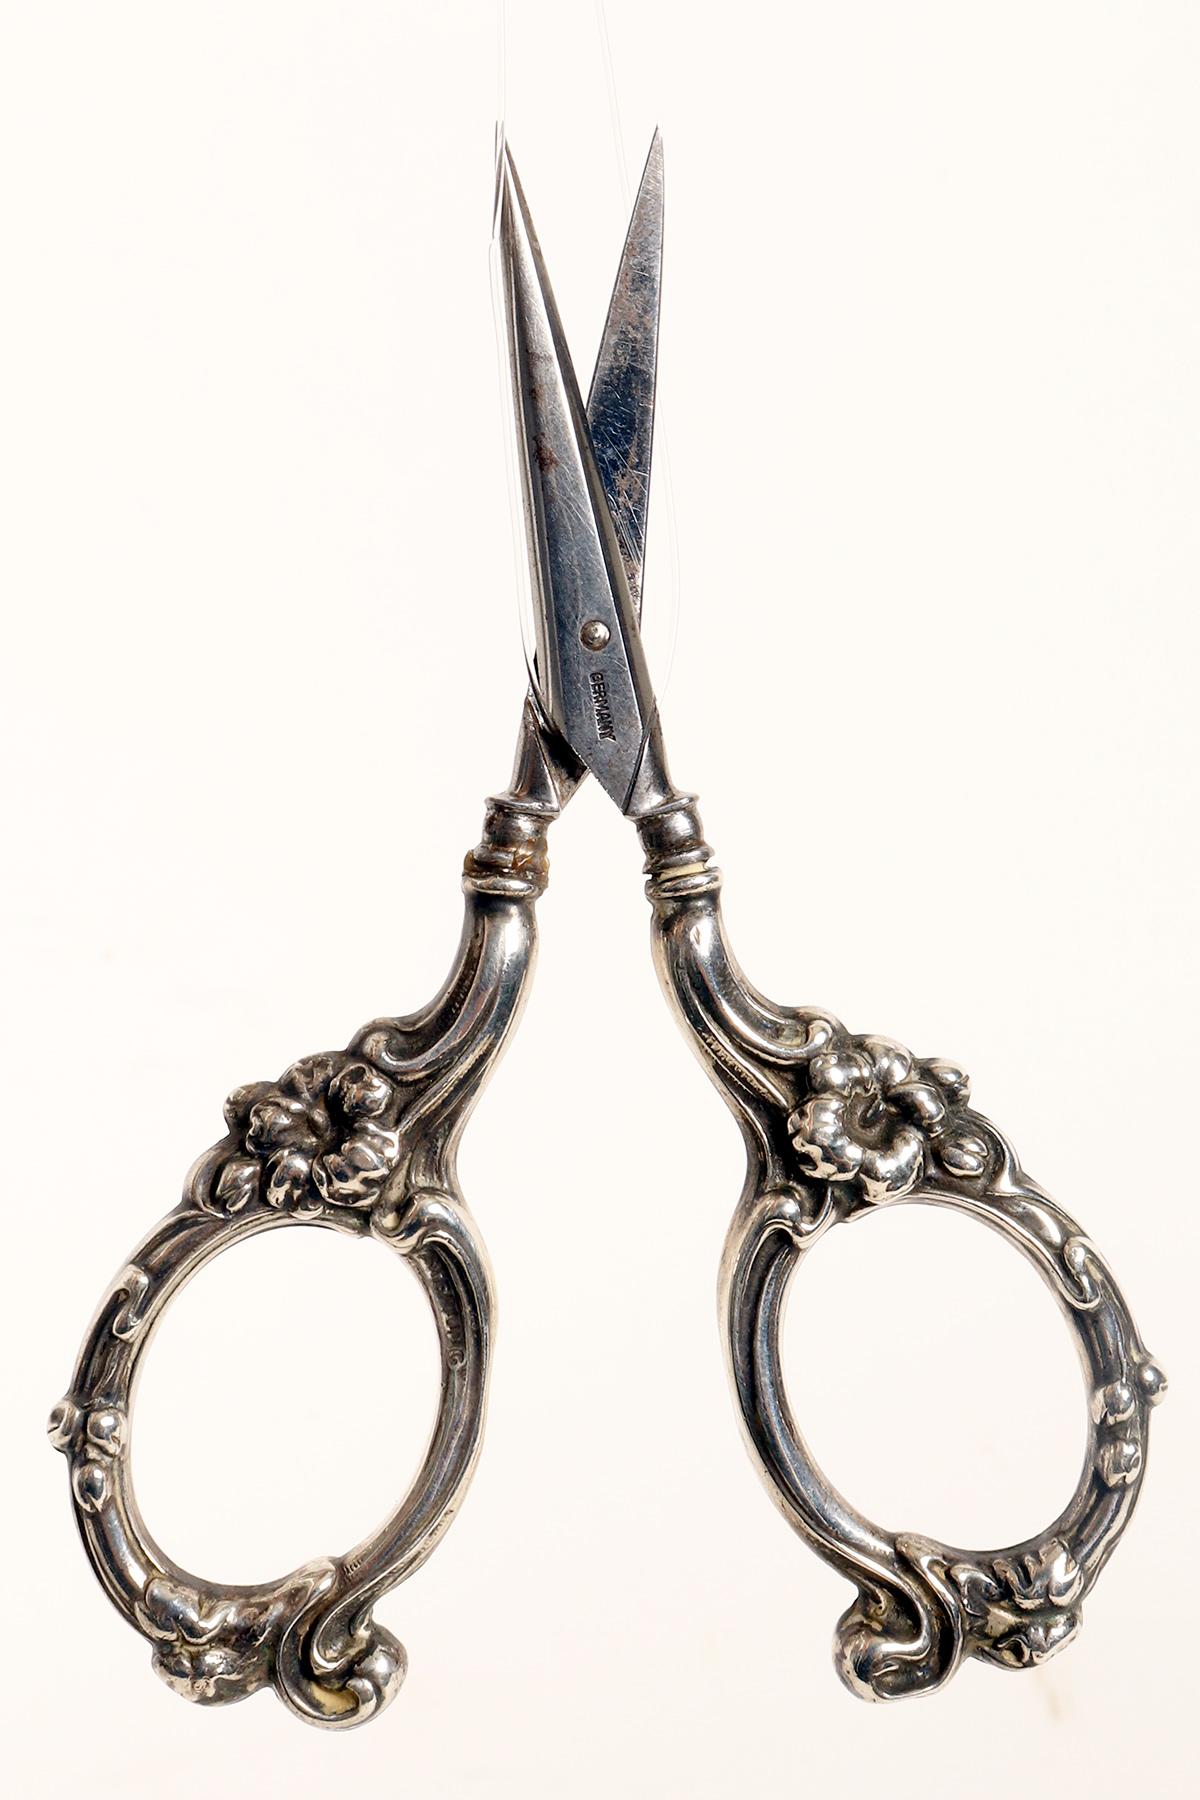 Sterling Silver Scissors to Cut the Stems of the Bunches of Grapes, USA, 1900 For Sale 4